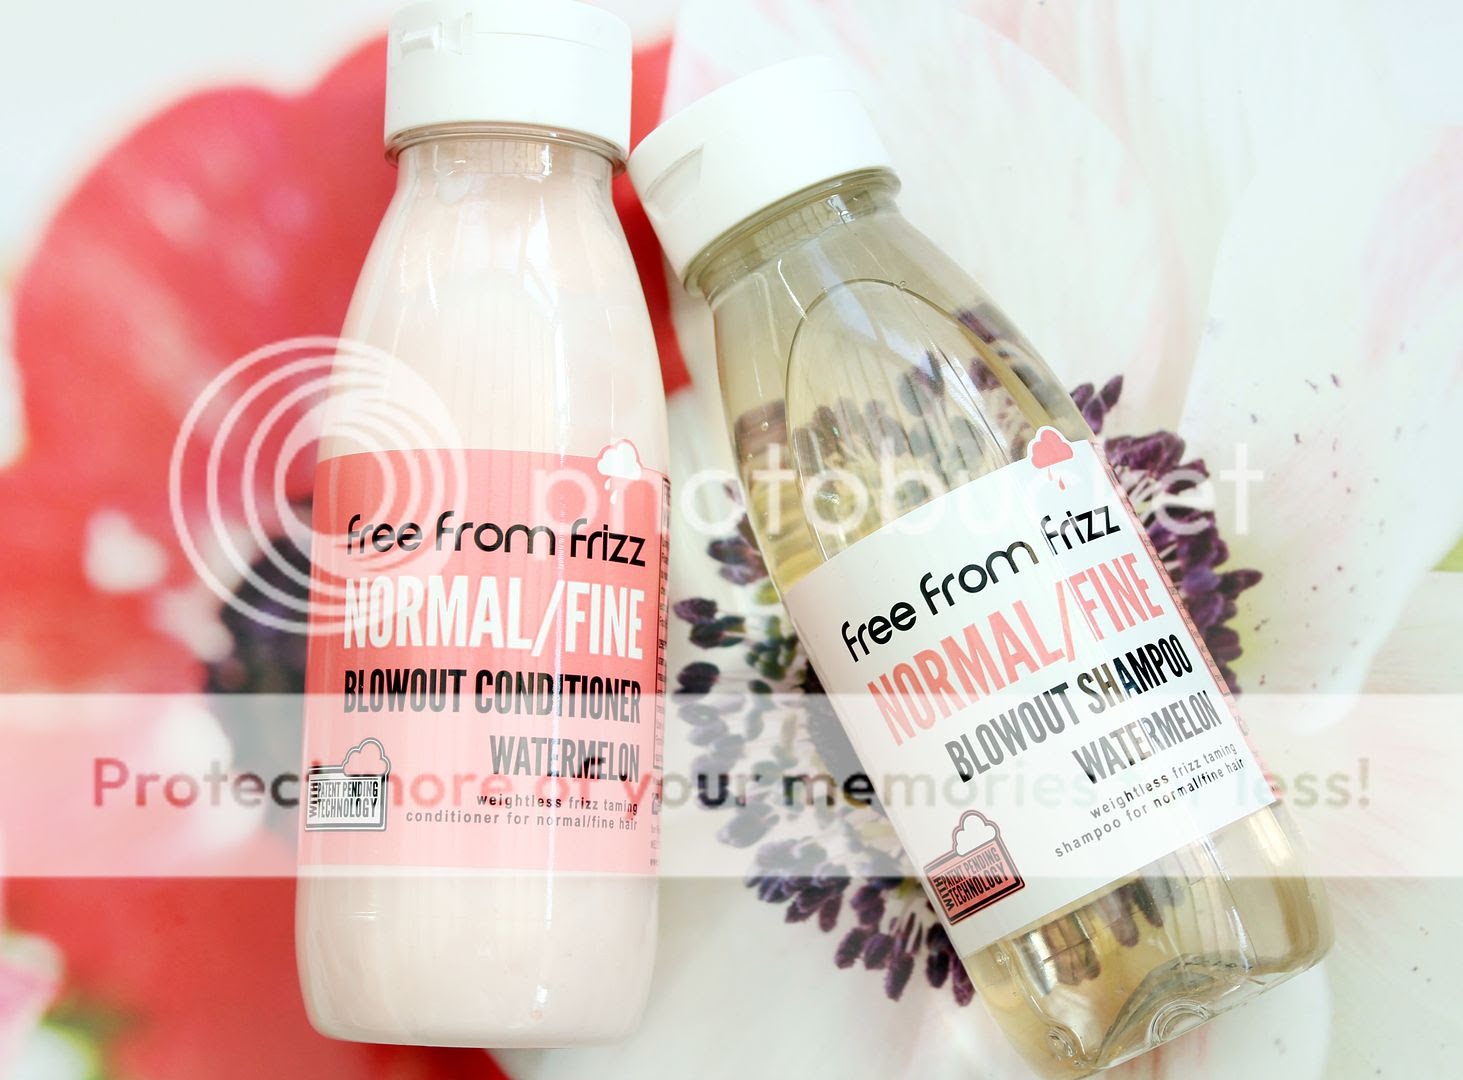 Free From Frizz Blowout Watermelon Shampoo and Conditioner